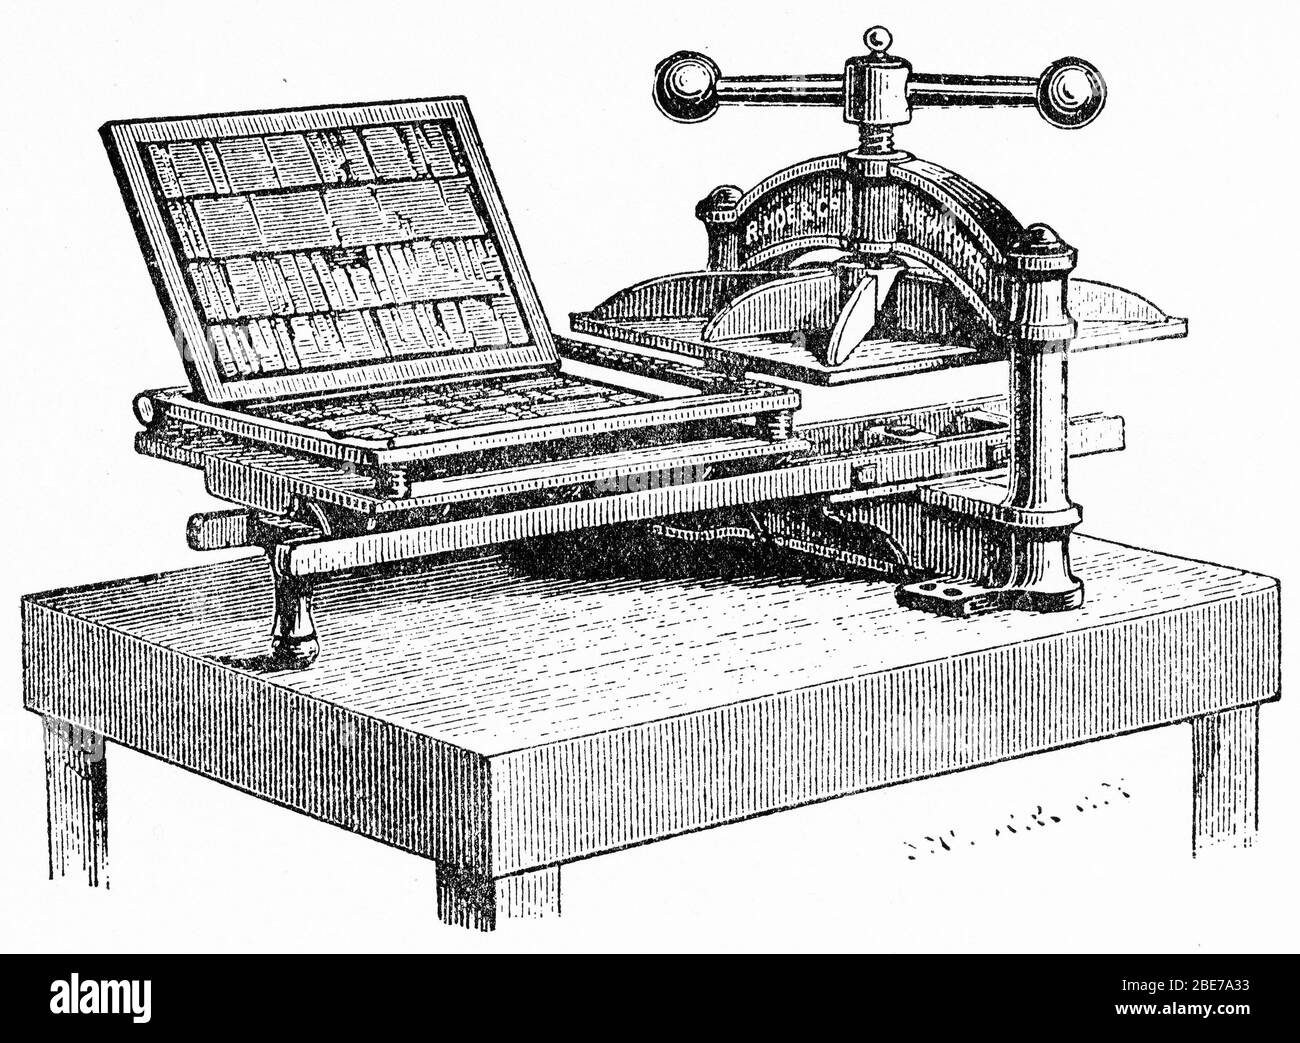 Engraving of a press used for stereotype moulding to reproduce the plates of printed type used for making books Stock Photo